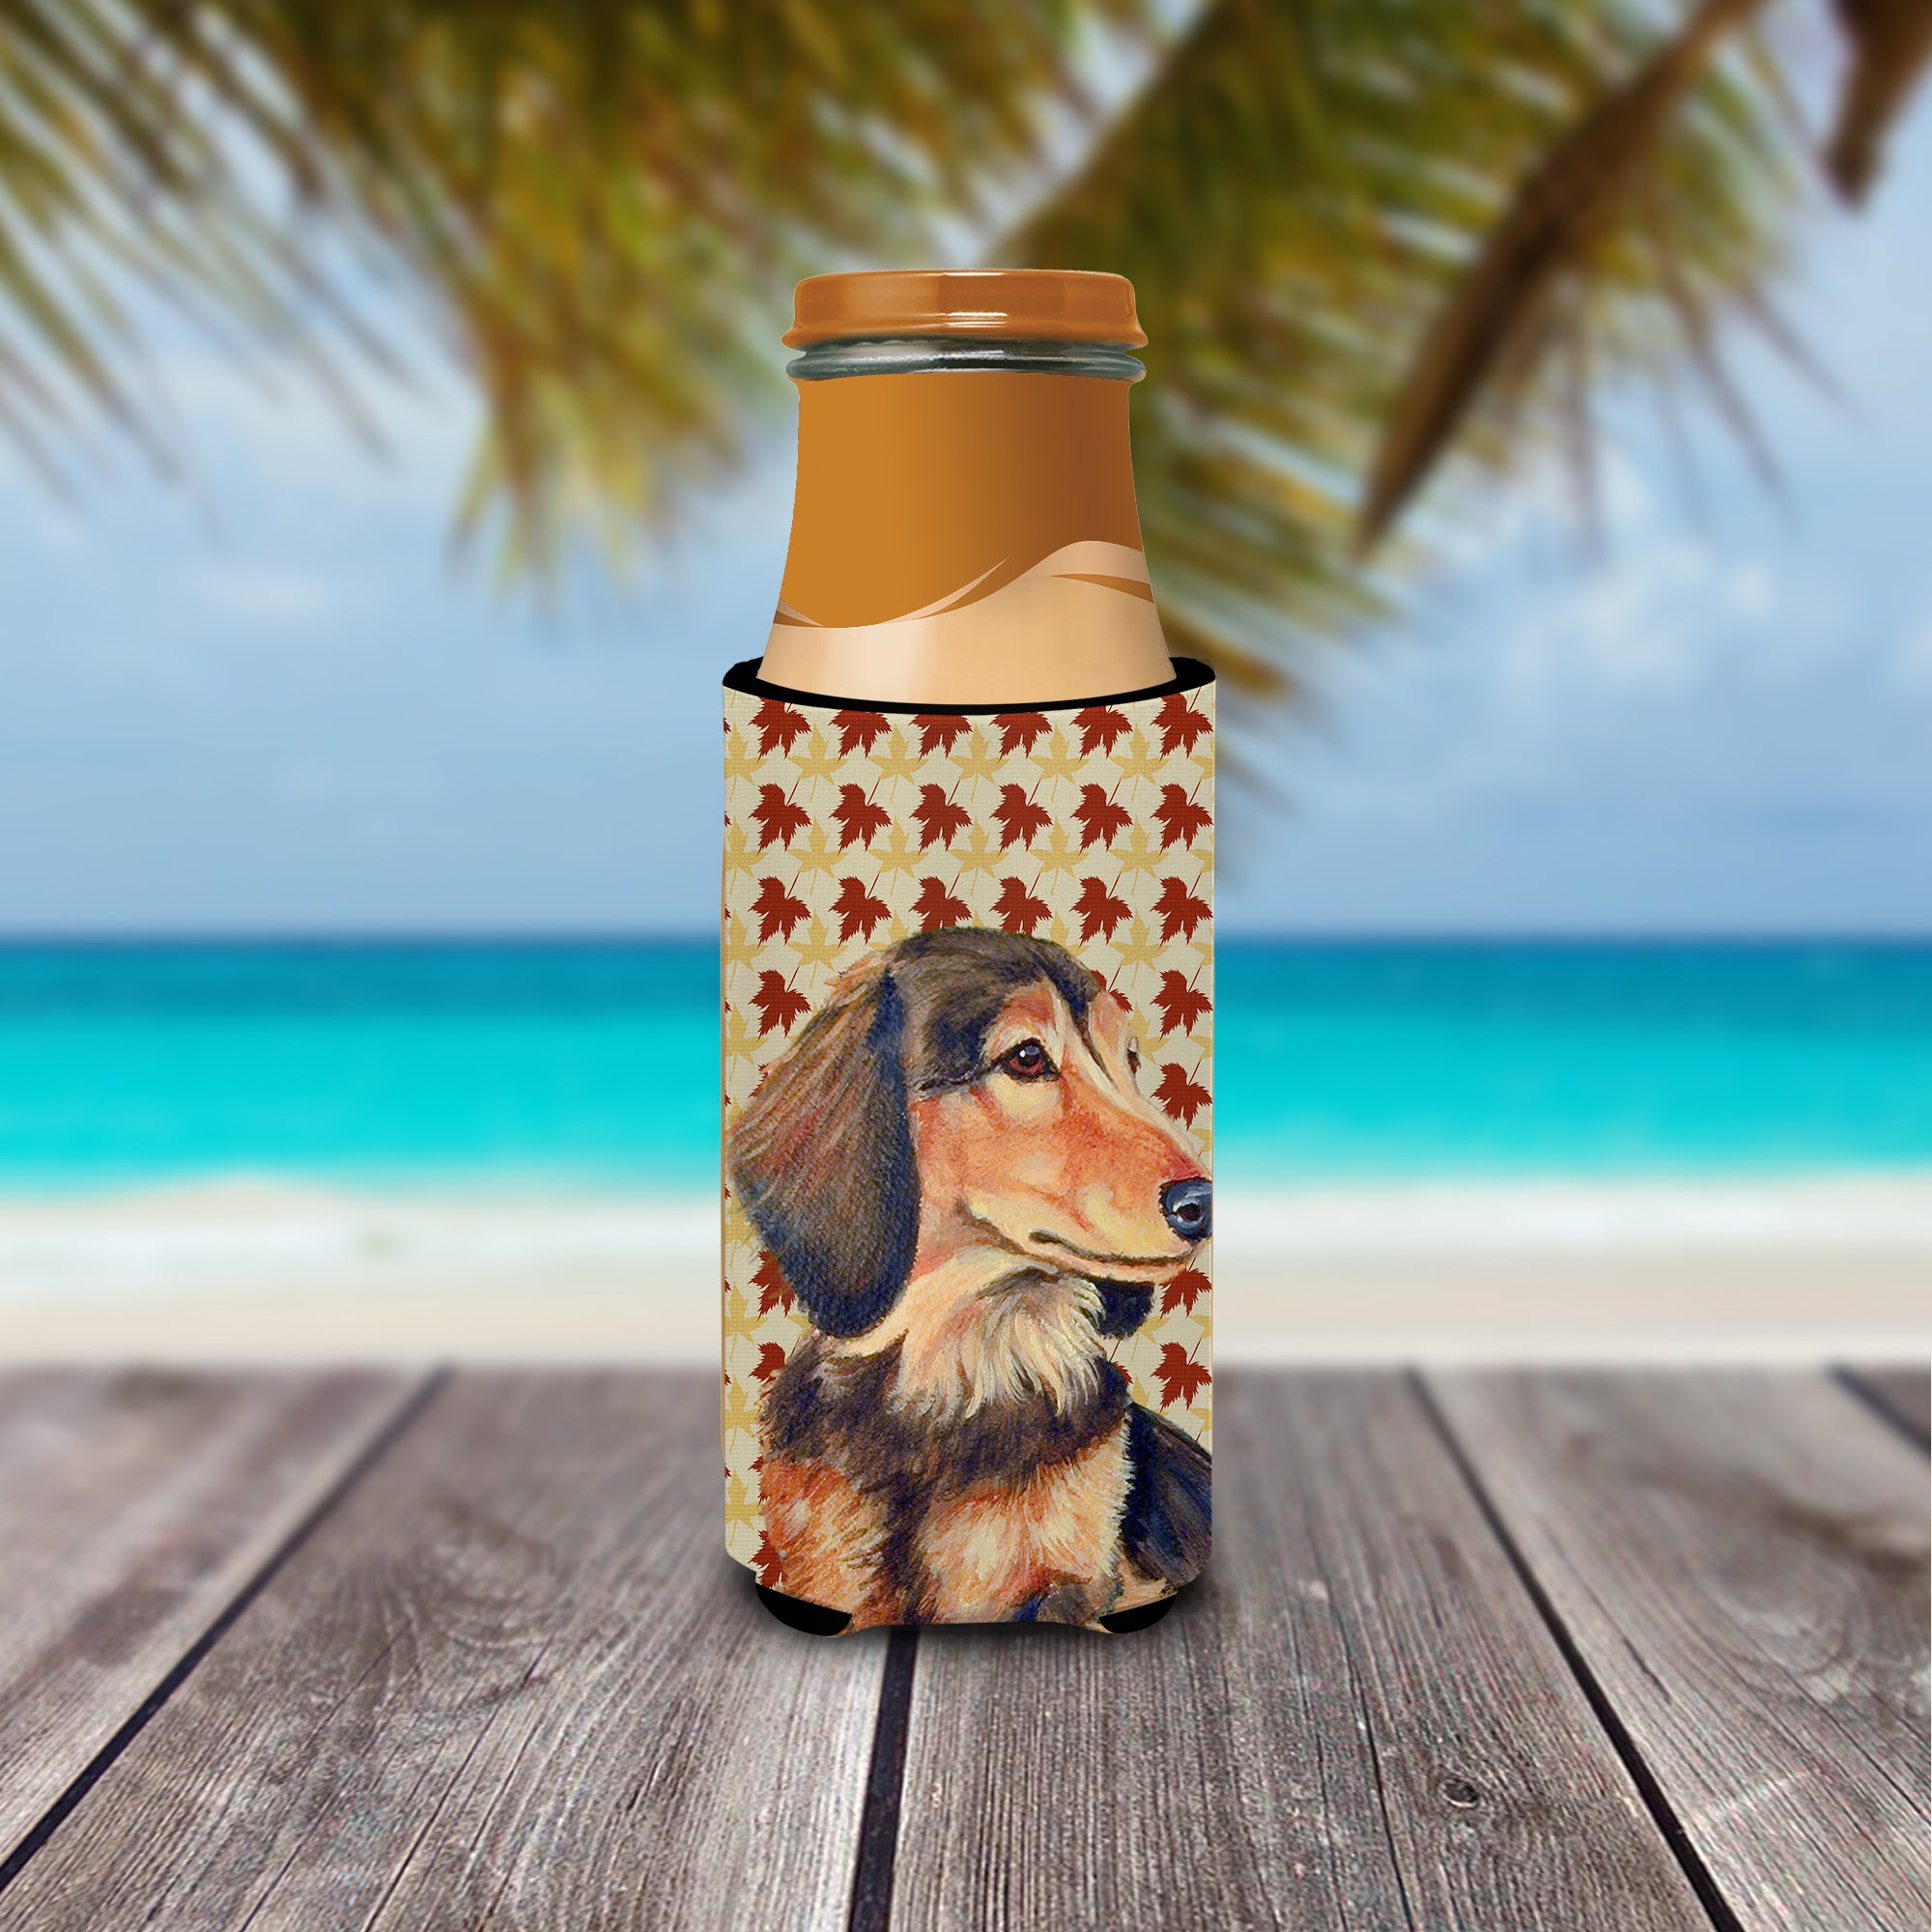 Dachshund Fall Leaves Portrait Ultra Beverage Insulators for slim cans LH9121MUK.